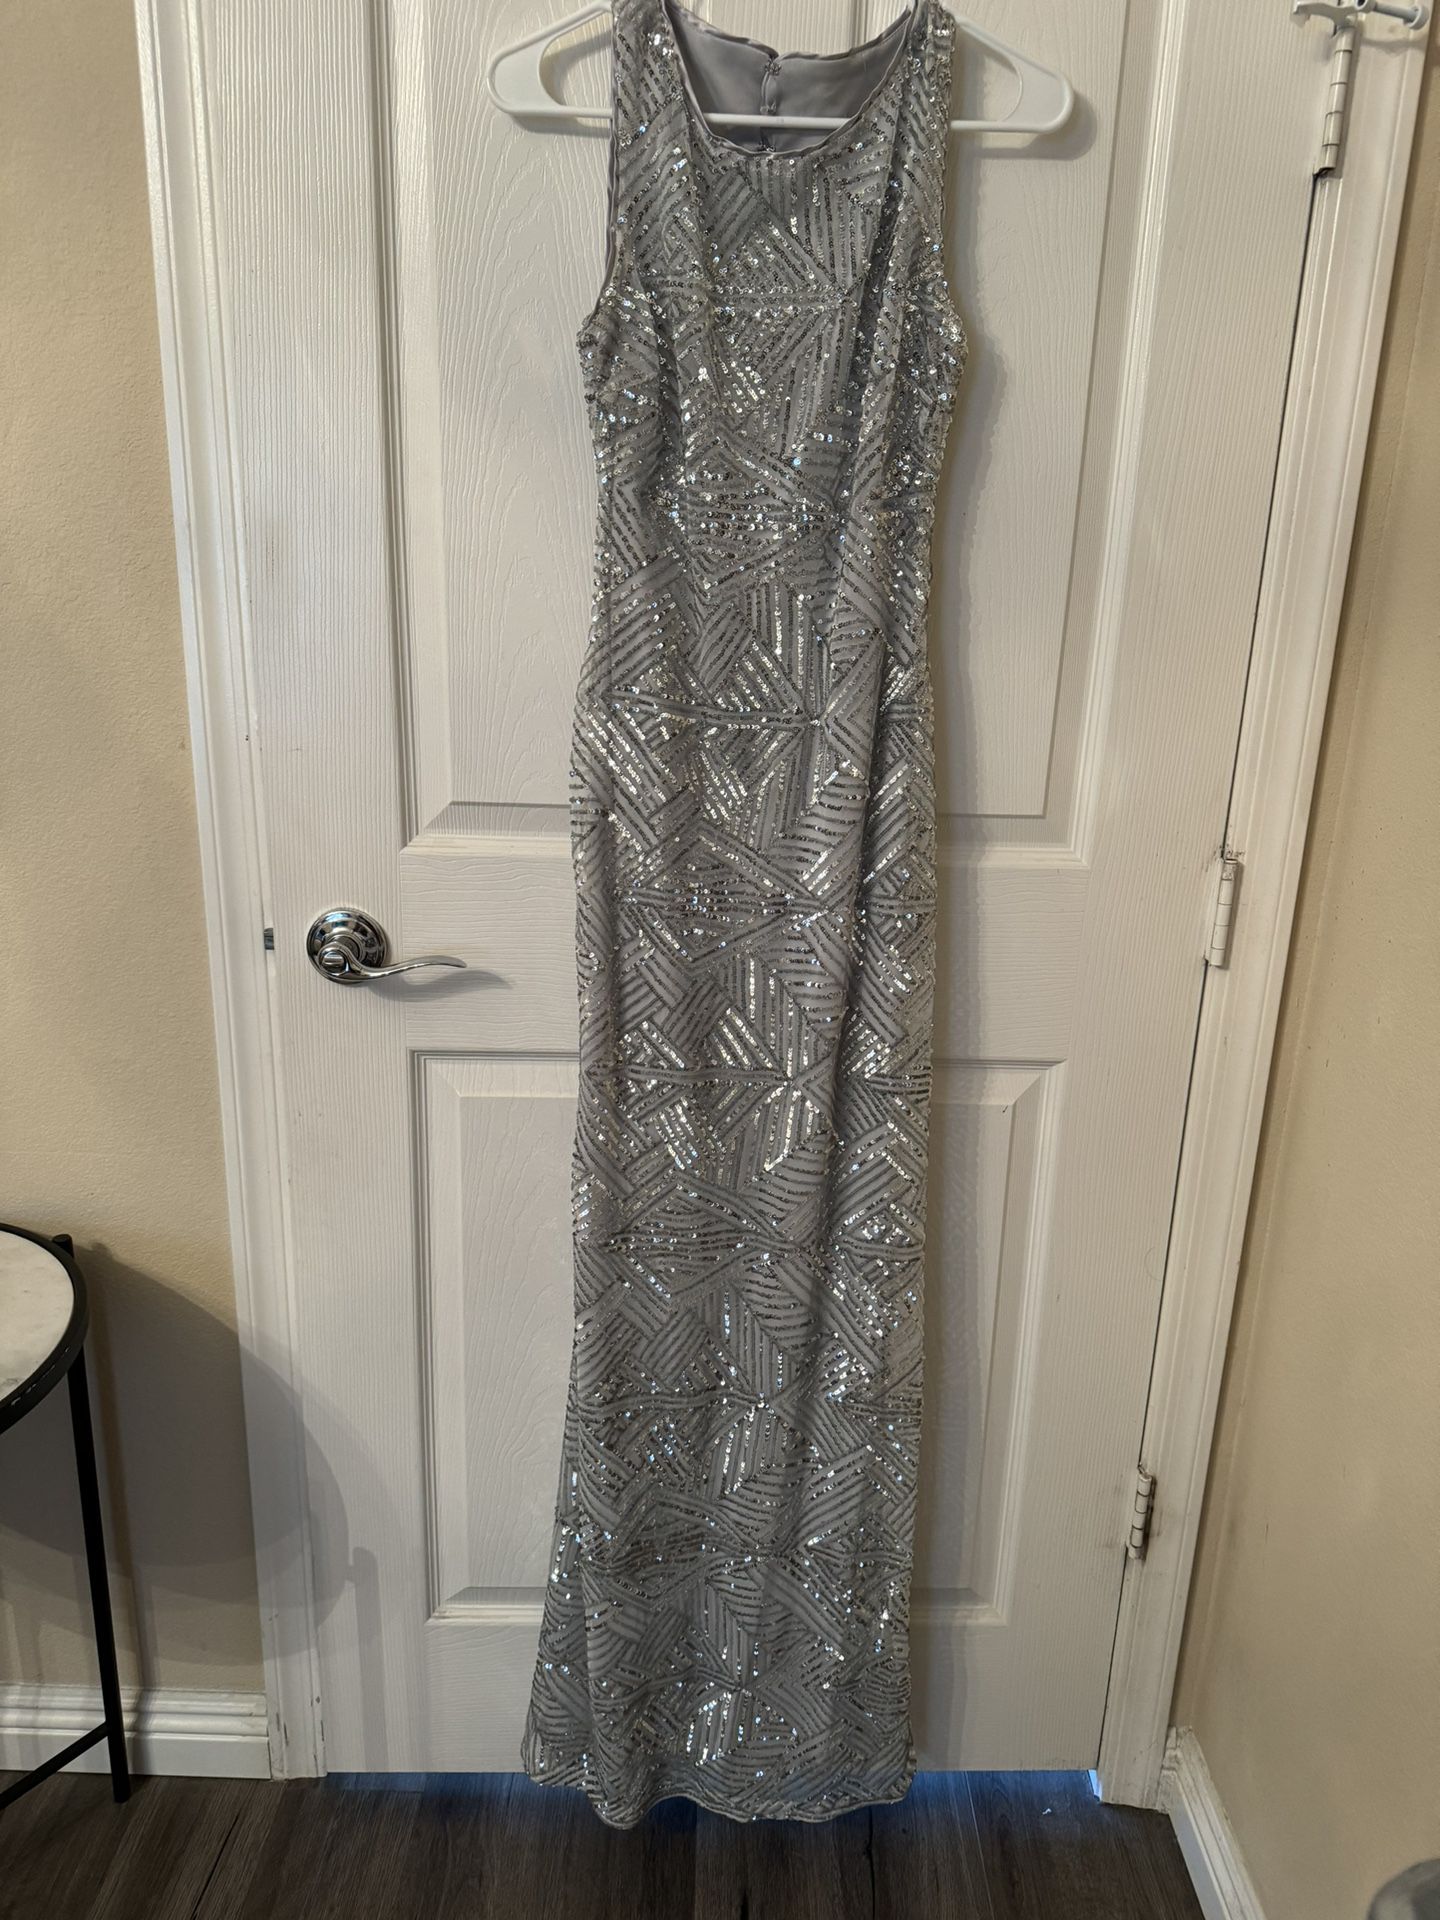 Silver Sequin Gown $30